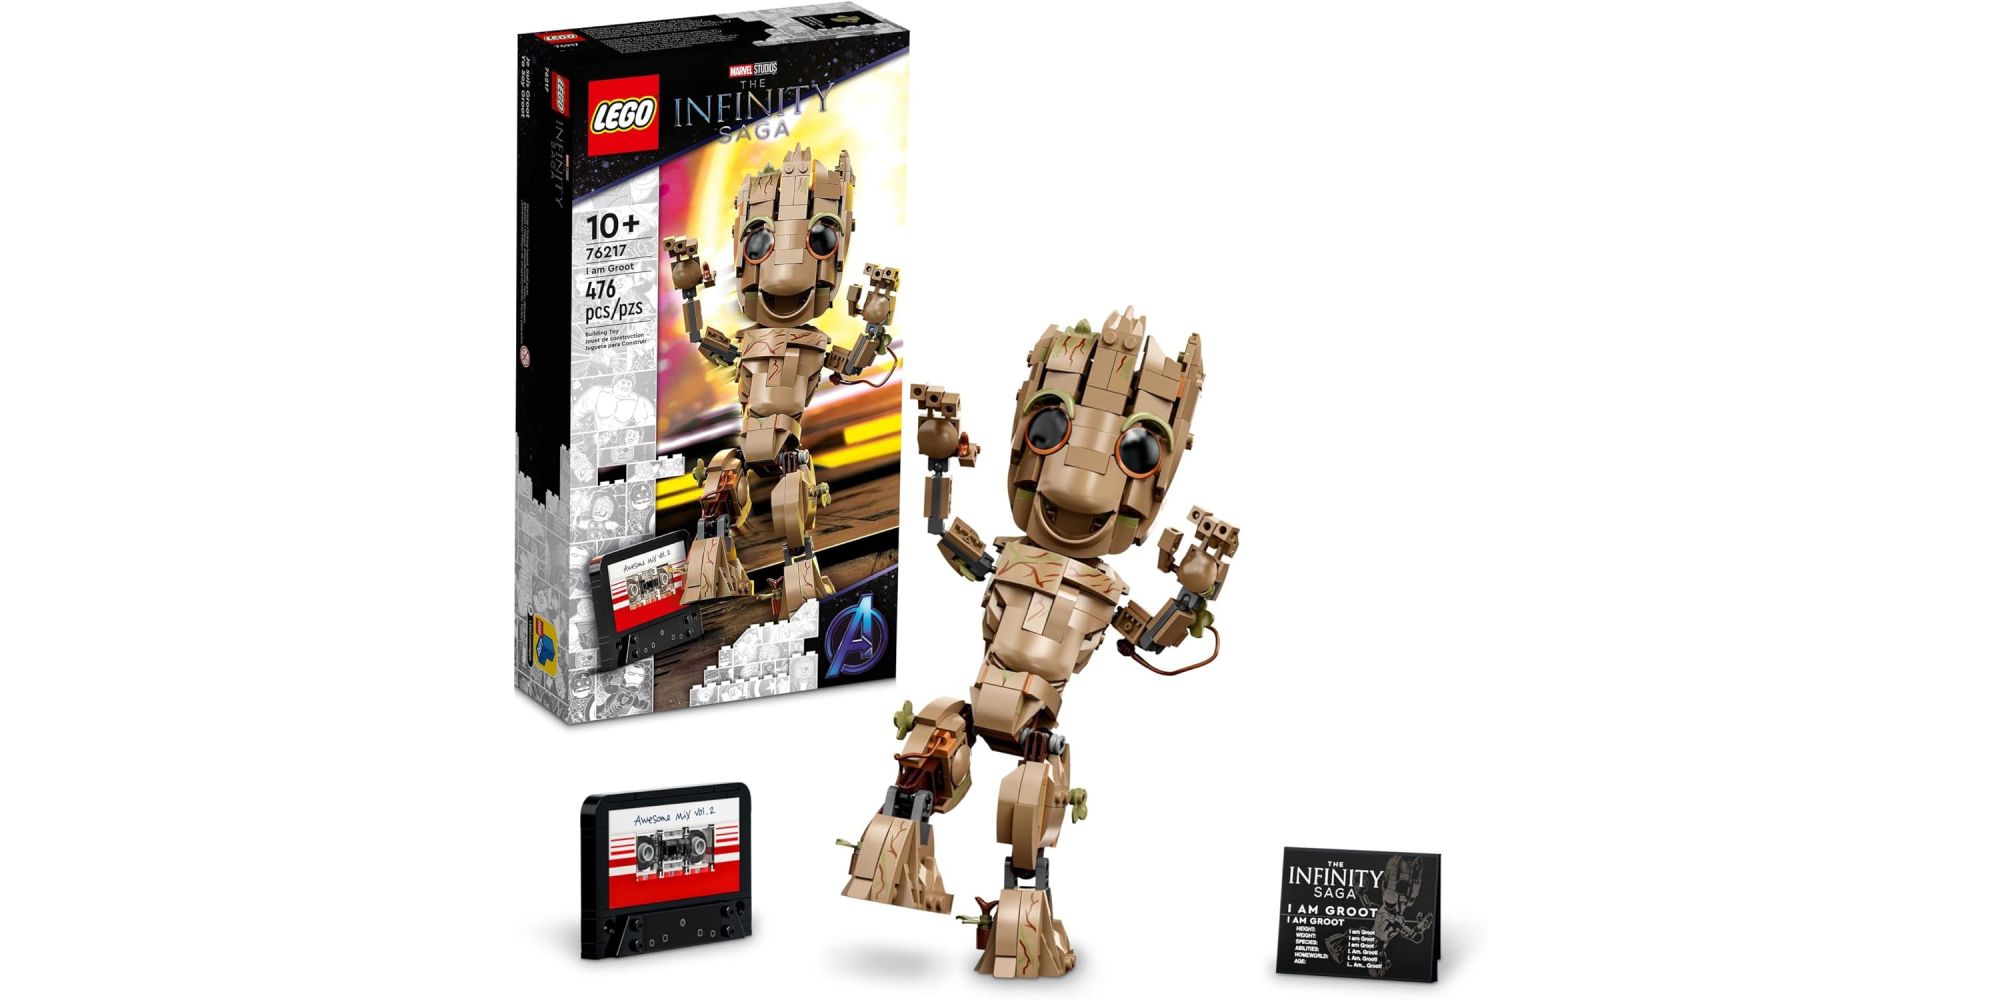 LEGO Marvel I Am Groot featuring a posable Groot, a LEGO cassette tape and an information card